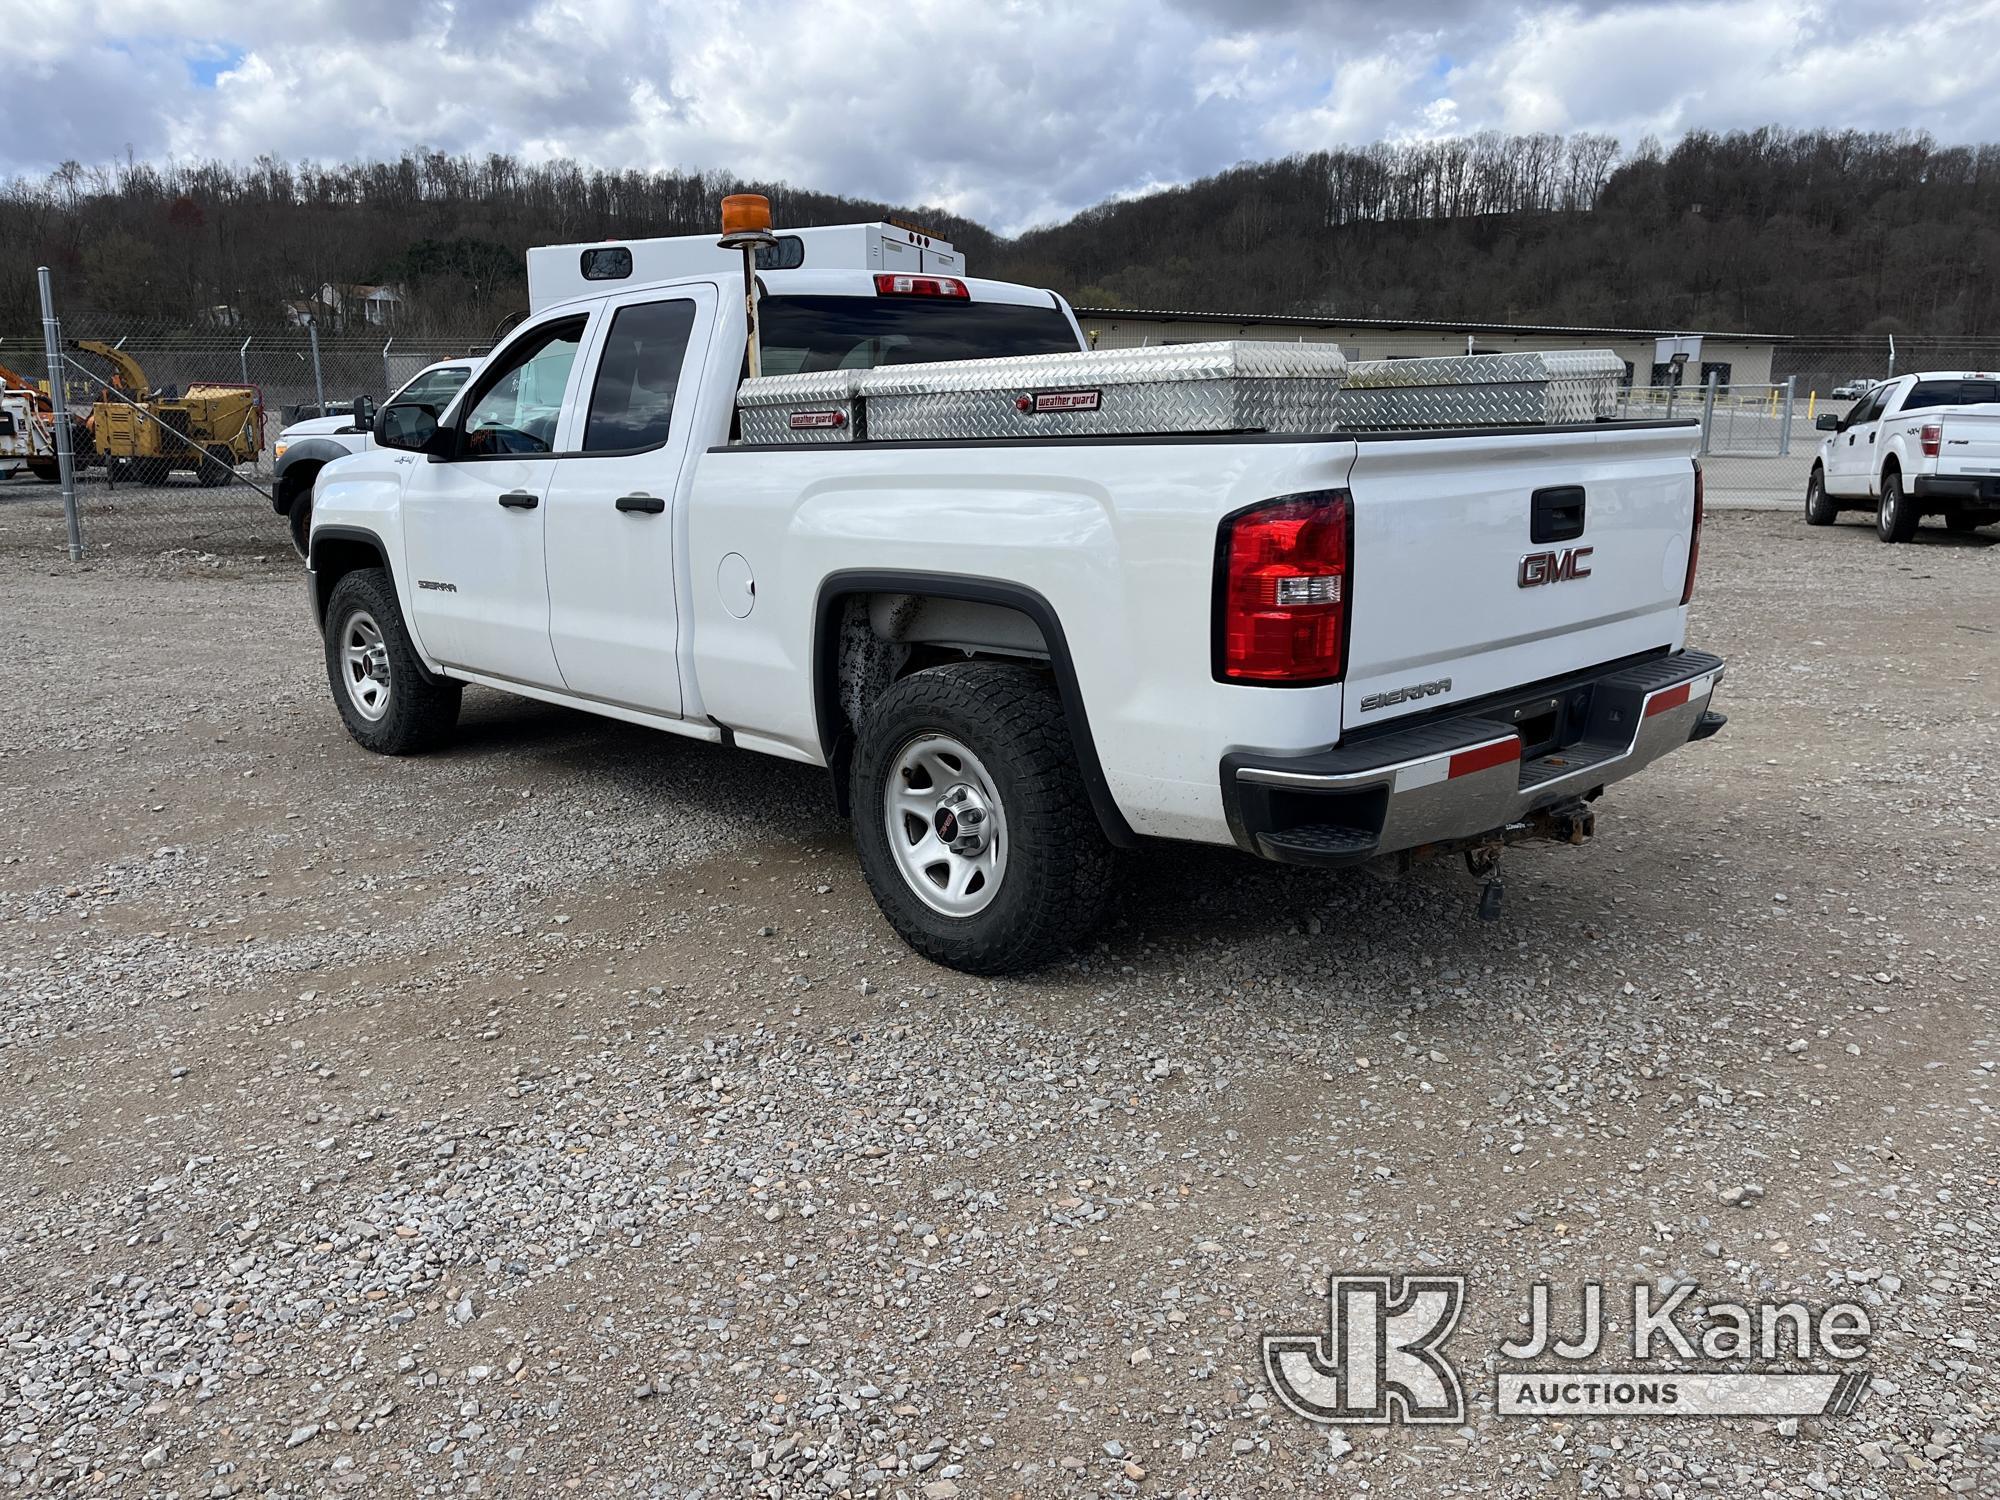 (Smock, PA) 2016 GMC Sierra 1500 4x4 Extended-Cab Pickup Truck Title Delay) (Runs & Moves, Check Eng